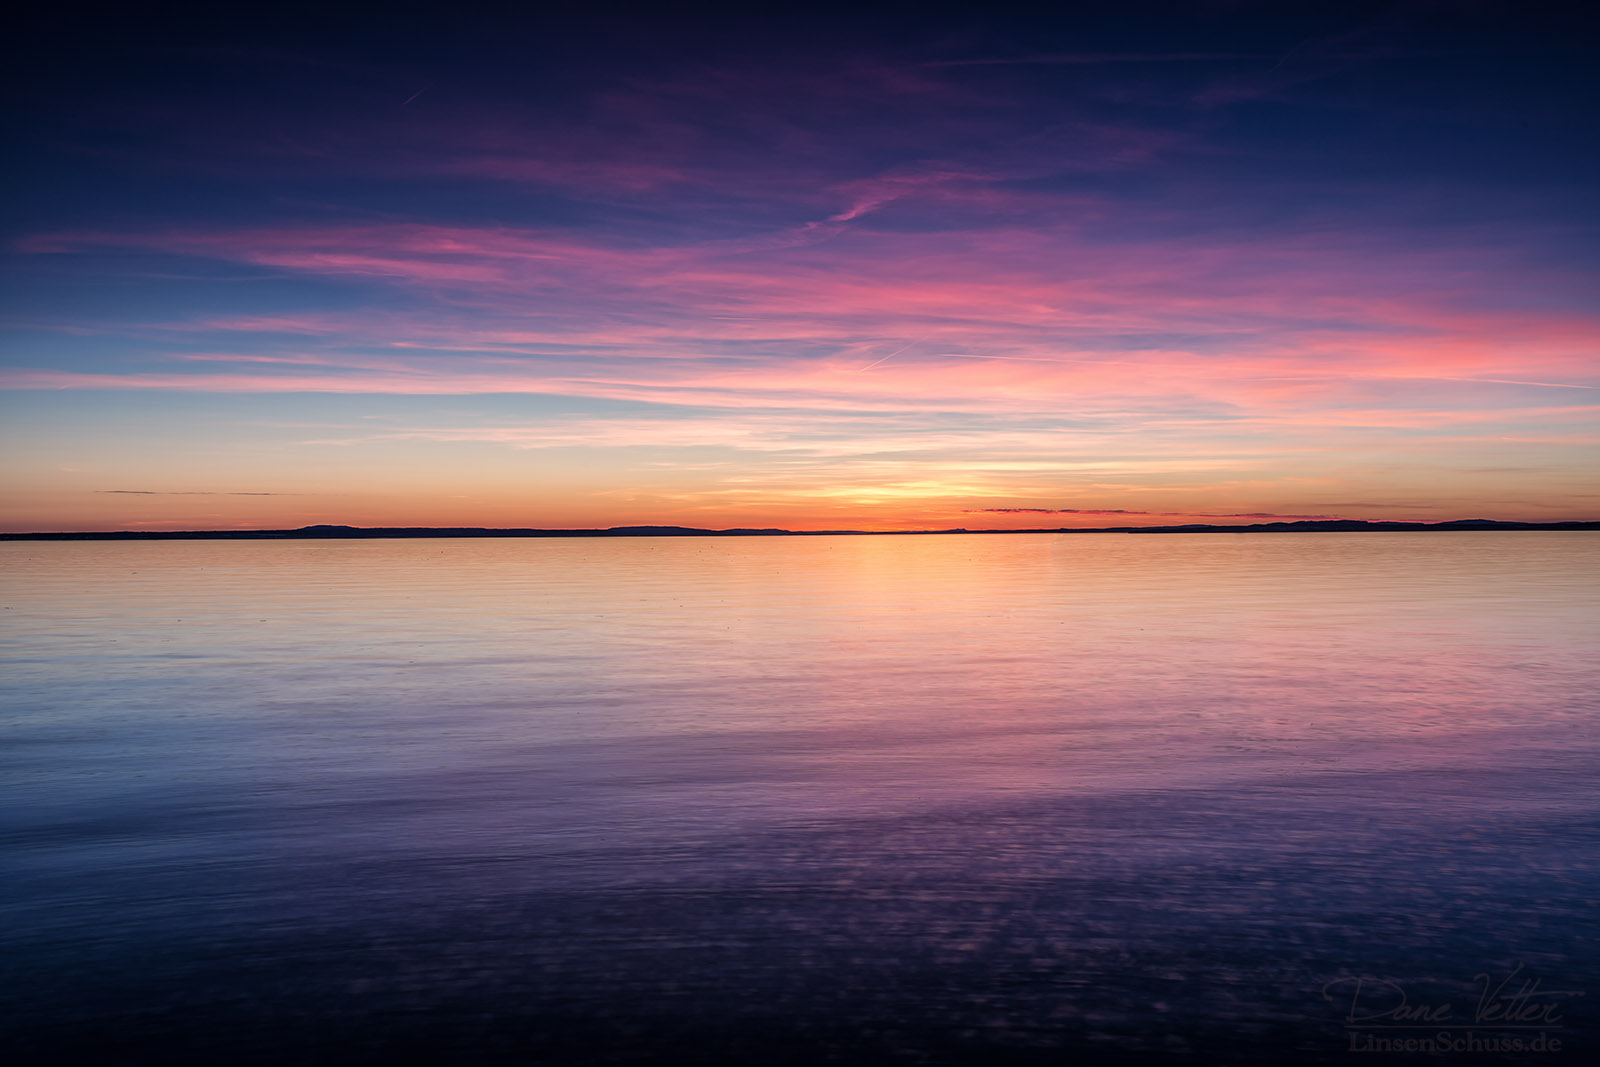 the_colorful_sunset_on_lake_constance_by_linsenschuss-d61tu9p.jpg